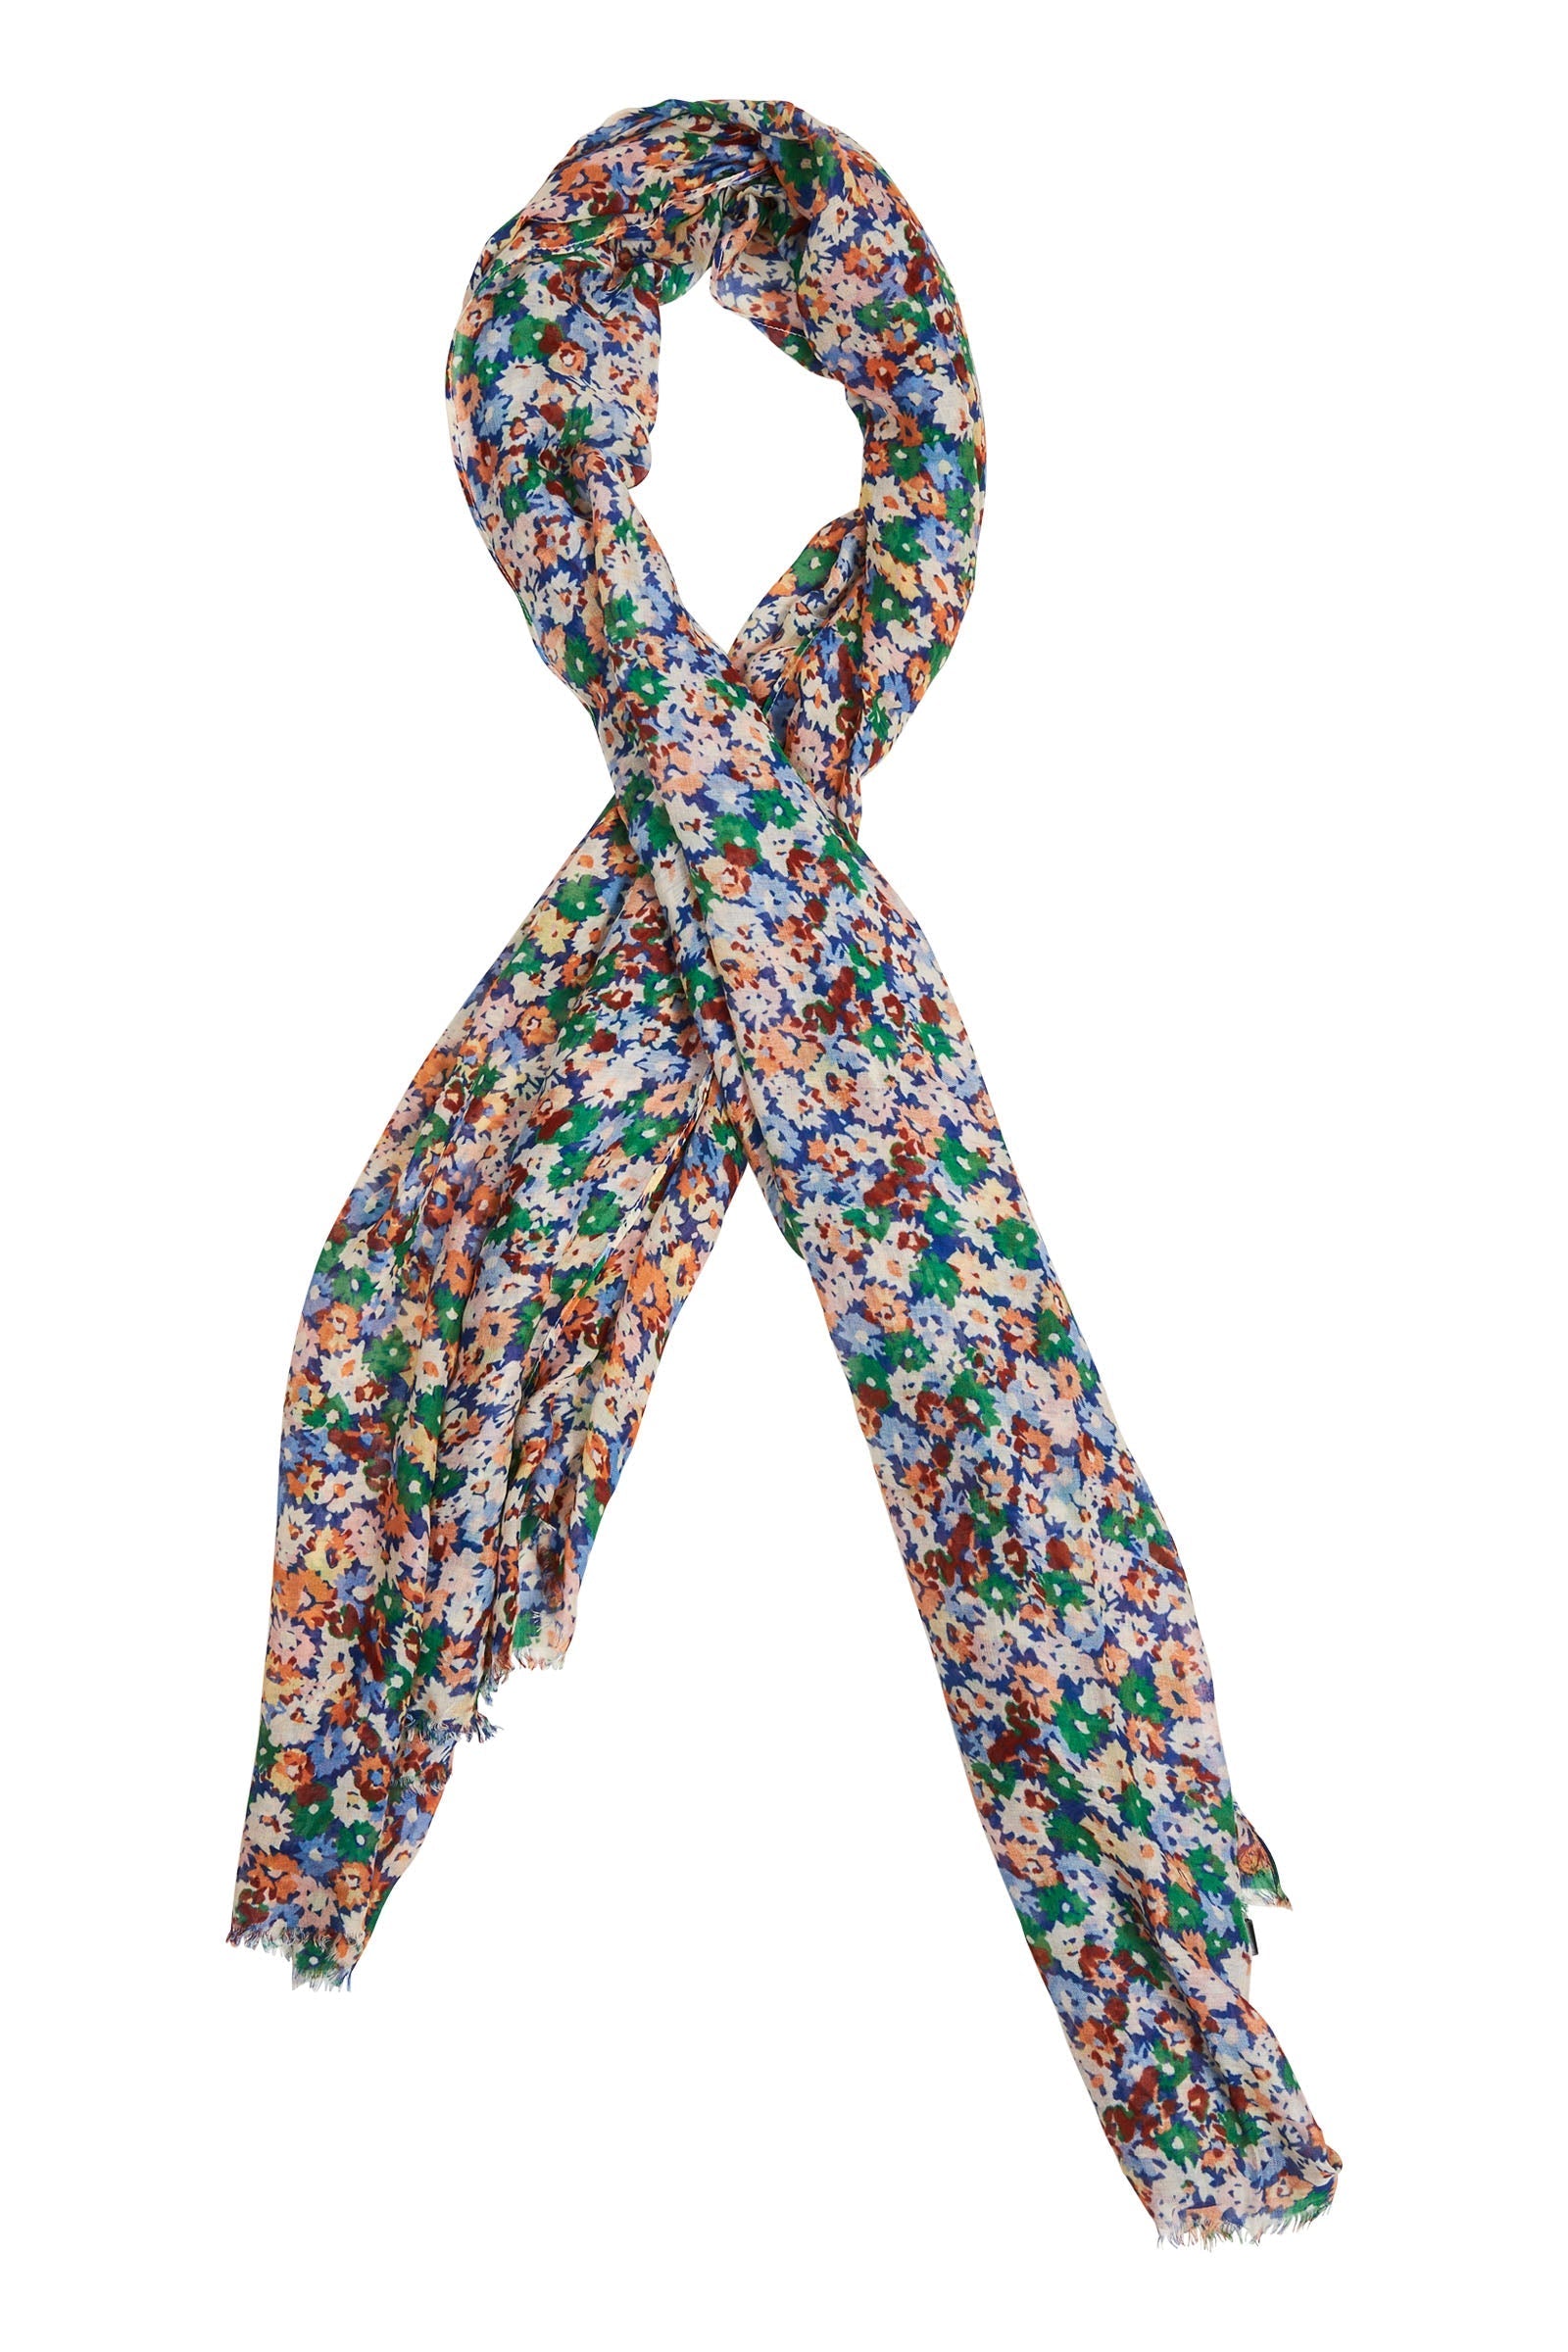 Euphoria Scarf - Meadow Bloom-Scarves, Belts & Gloves-Isle Of Mine-The Bay Room